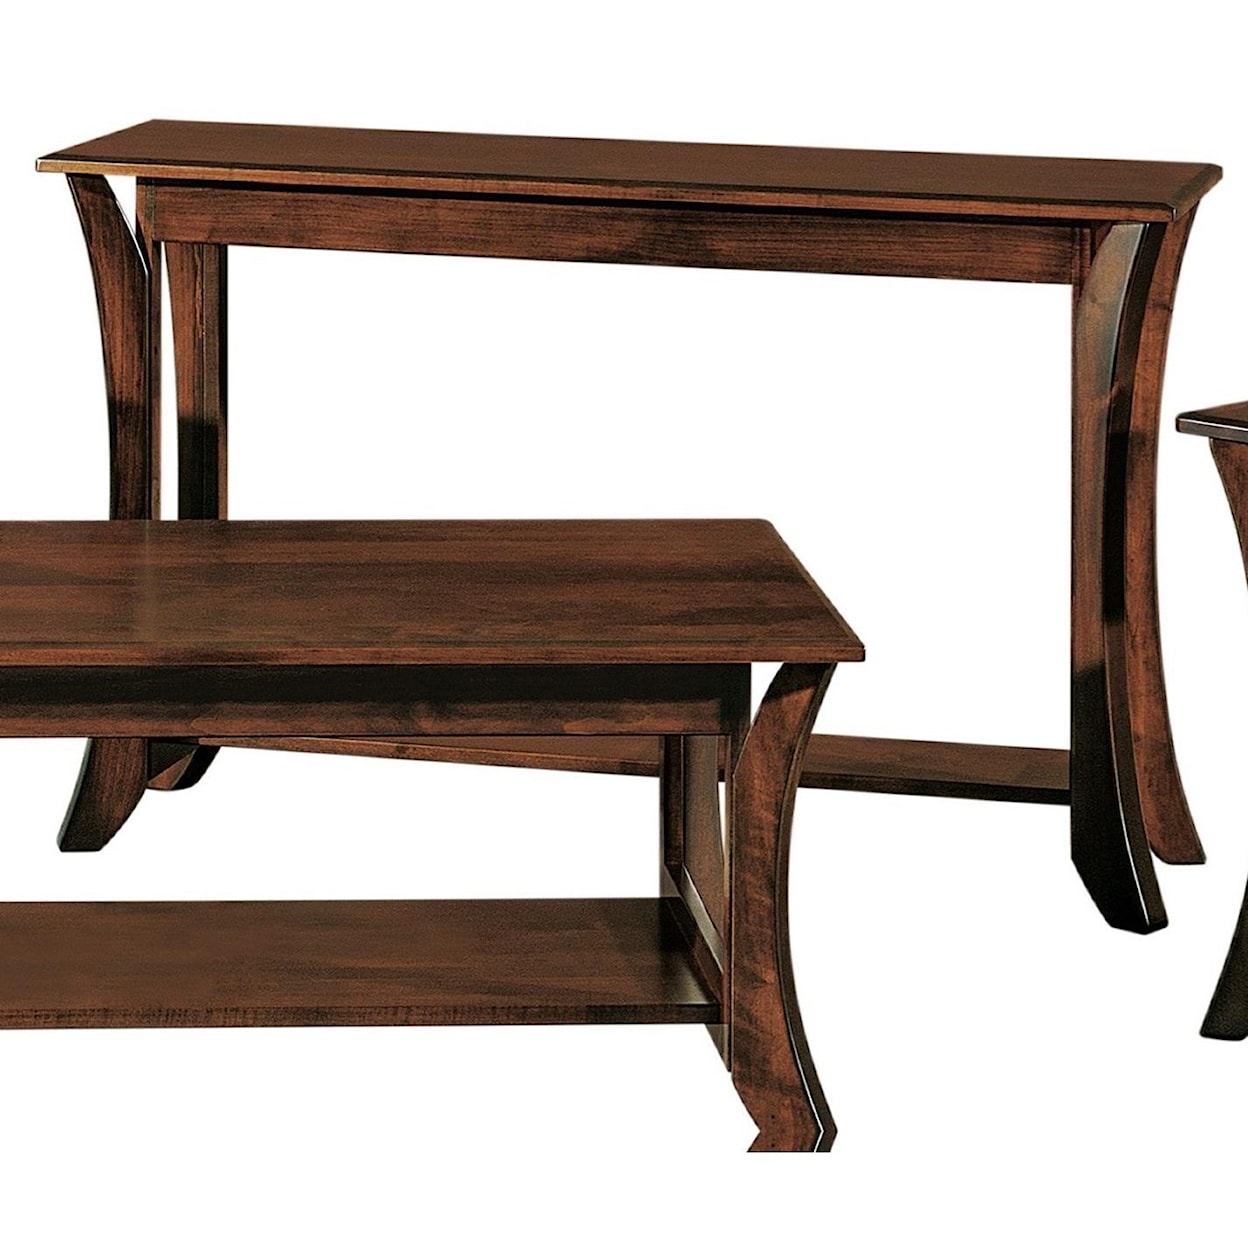 Crystal Valley Hardwoods Discovery Sofa Table